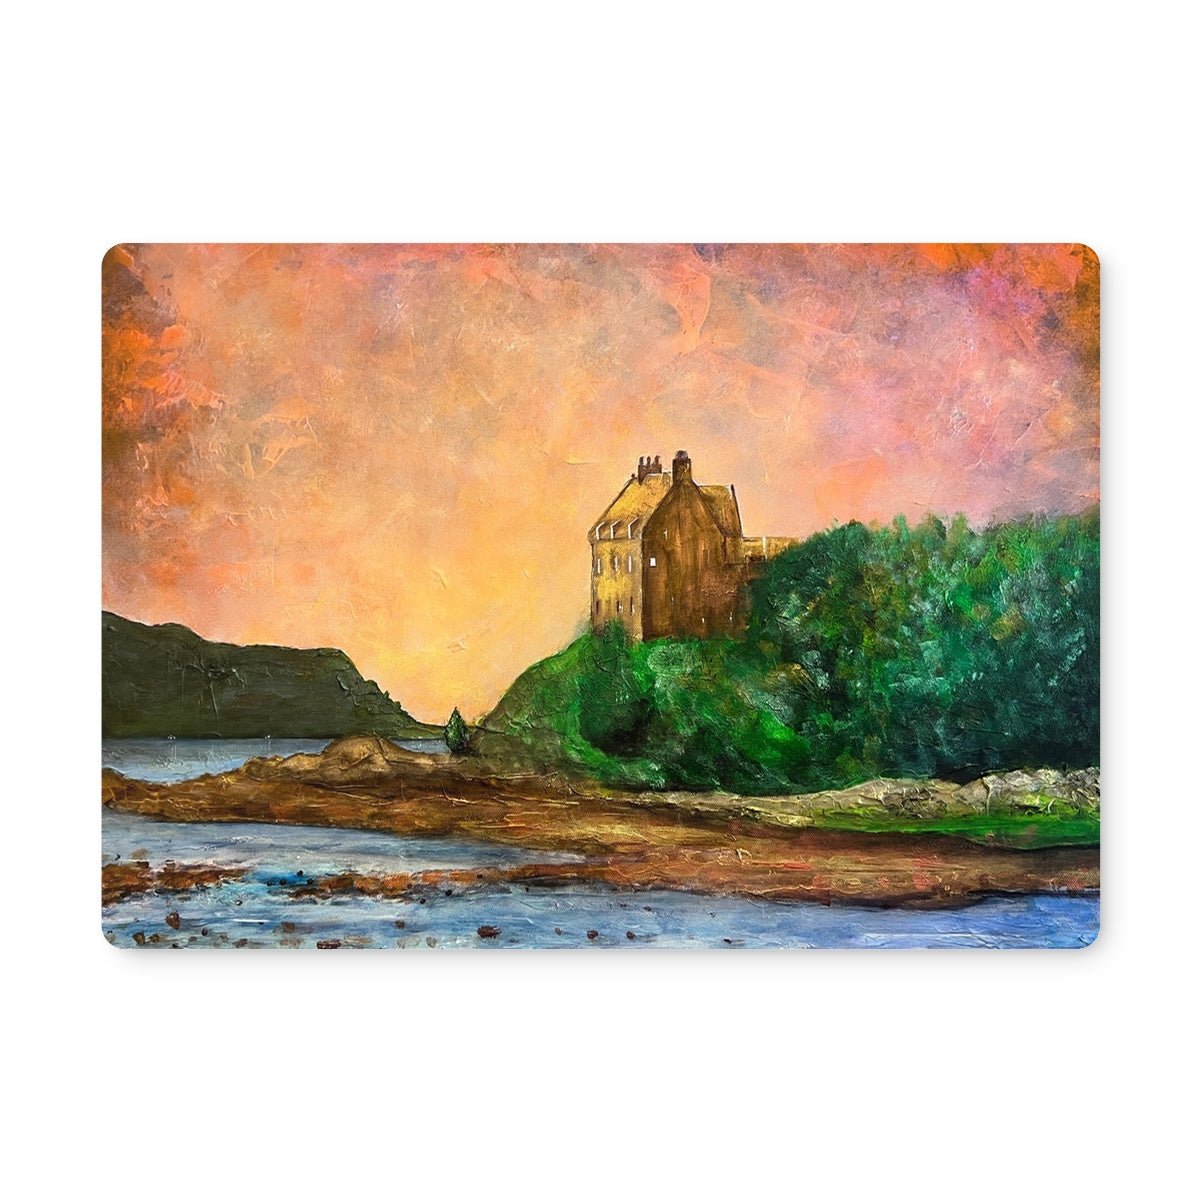 Duntrune Castle Art Gifts Placemat-Placemats-Scottish Castles Art Gallery-6 Placemats-Paintings, Prints, Homeware, Art Gifts From Scotland By Scottish Artist Kevin Hunter